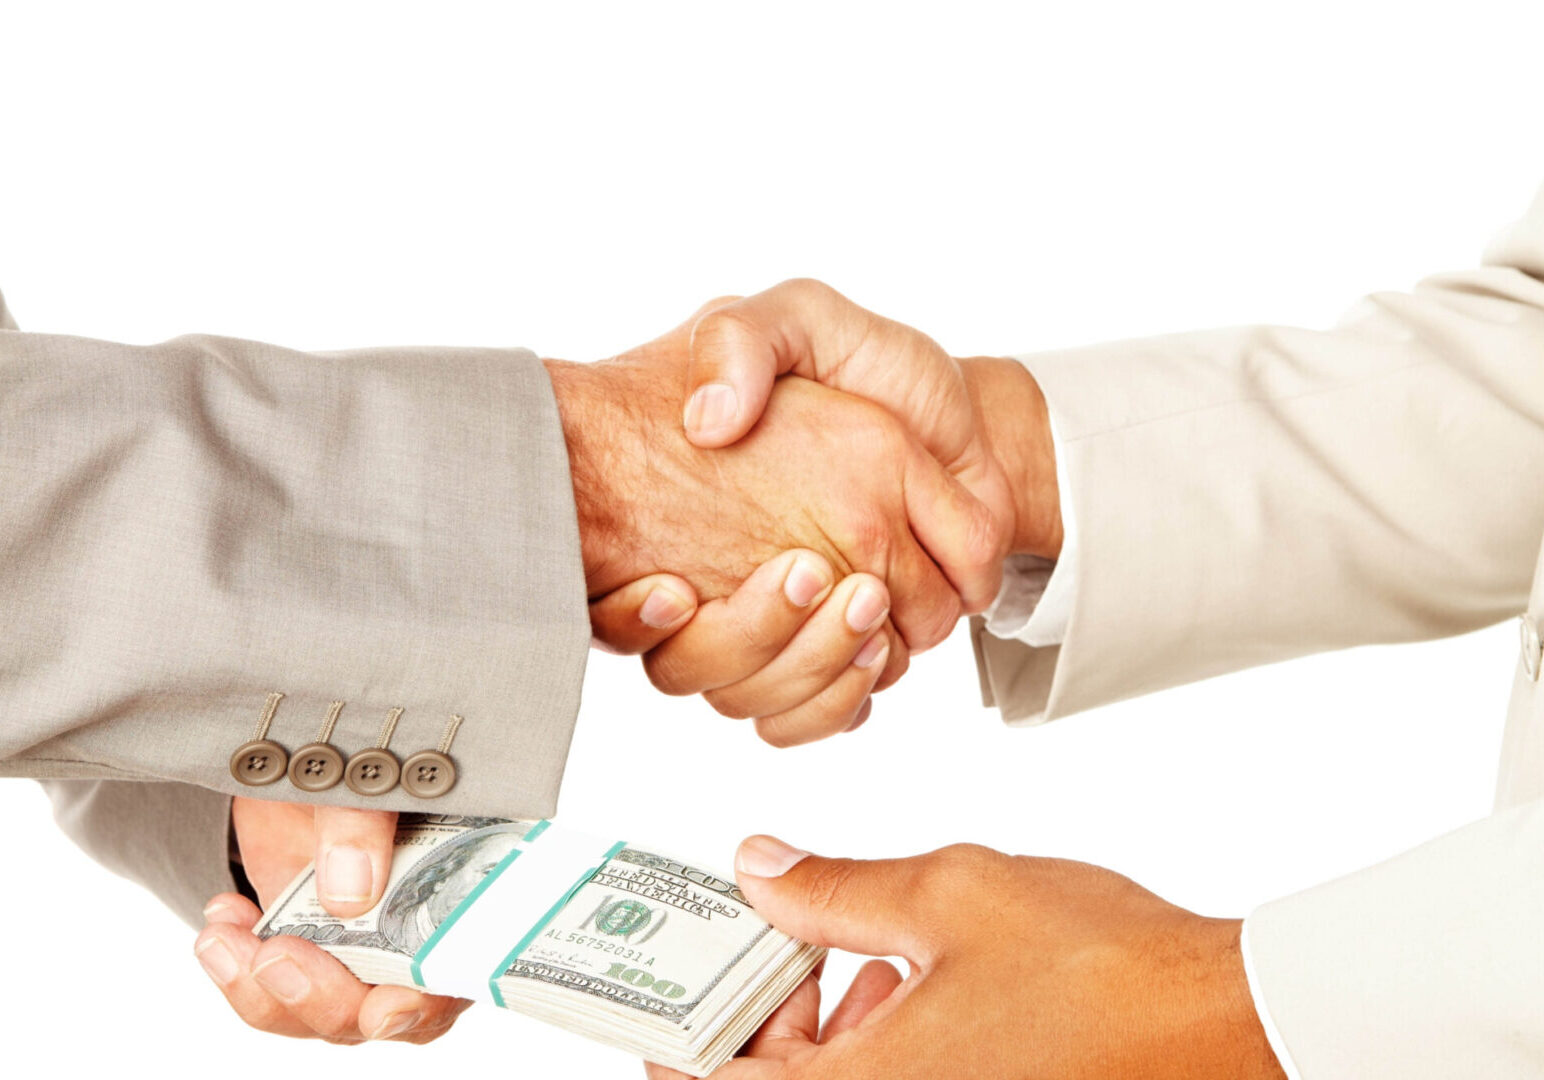 Close-up of a business people handshaking and bribing against white background